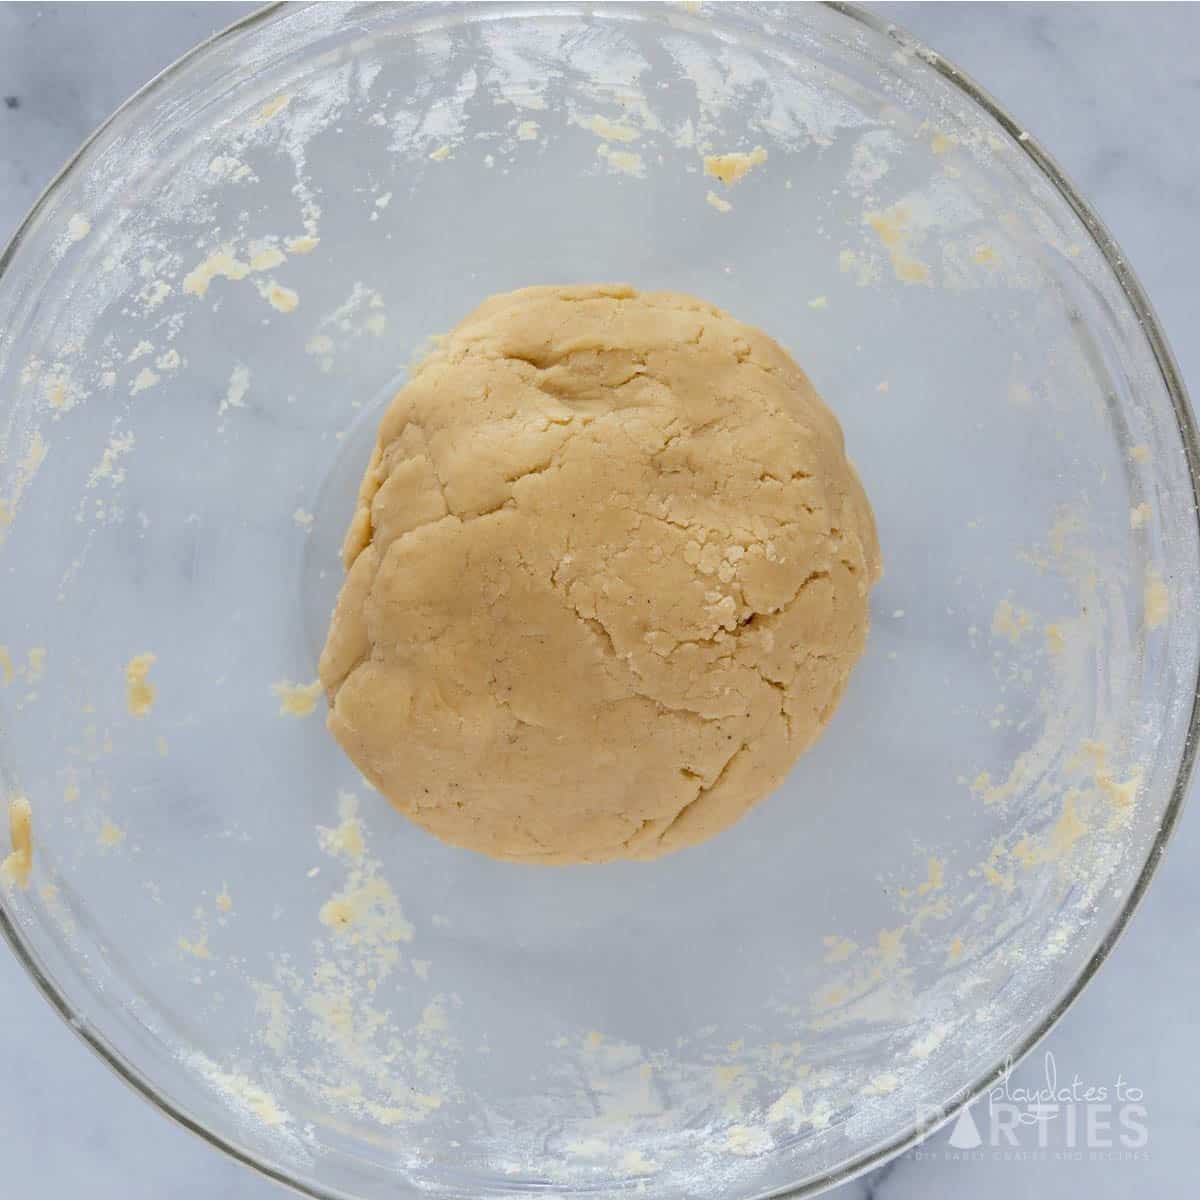 A ball of sugar cookie dough in a large glass bowl.